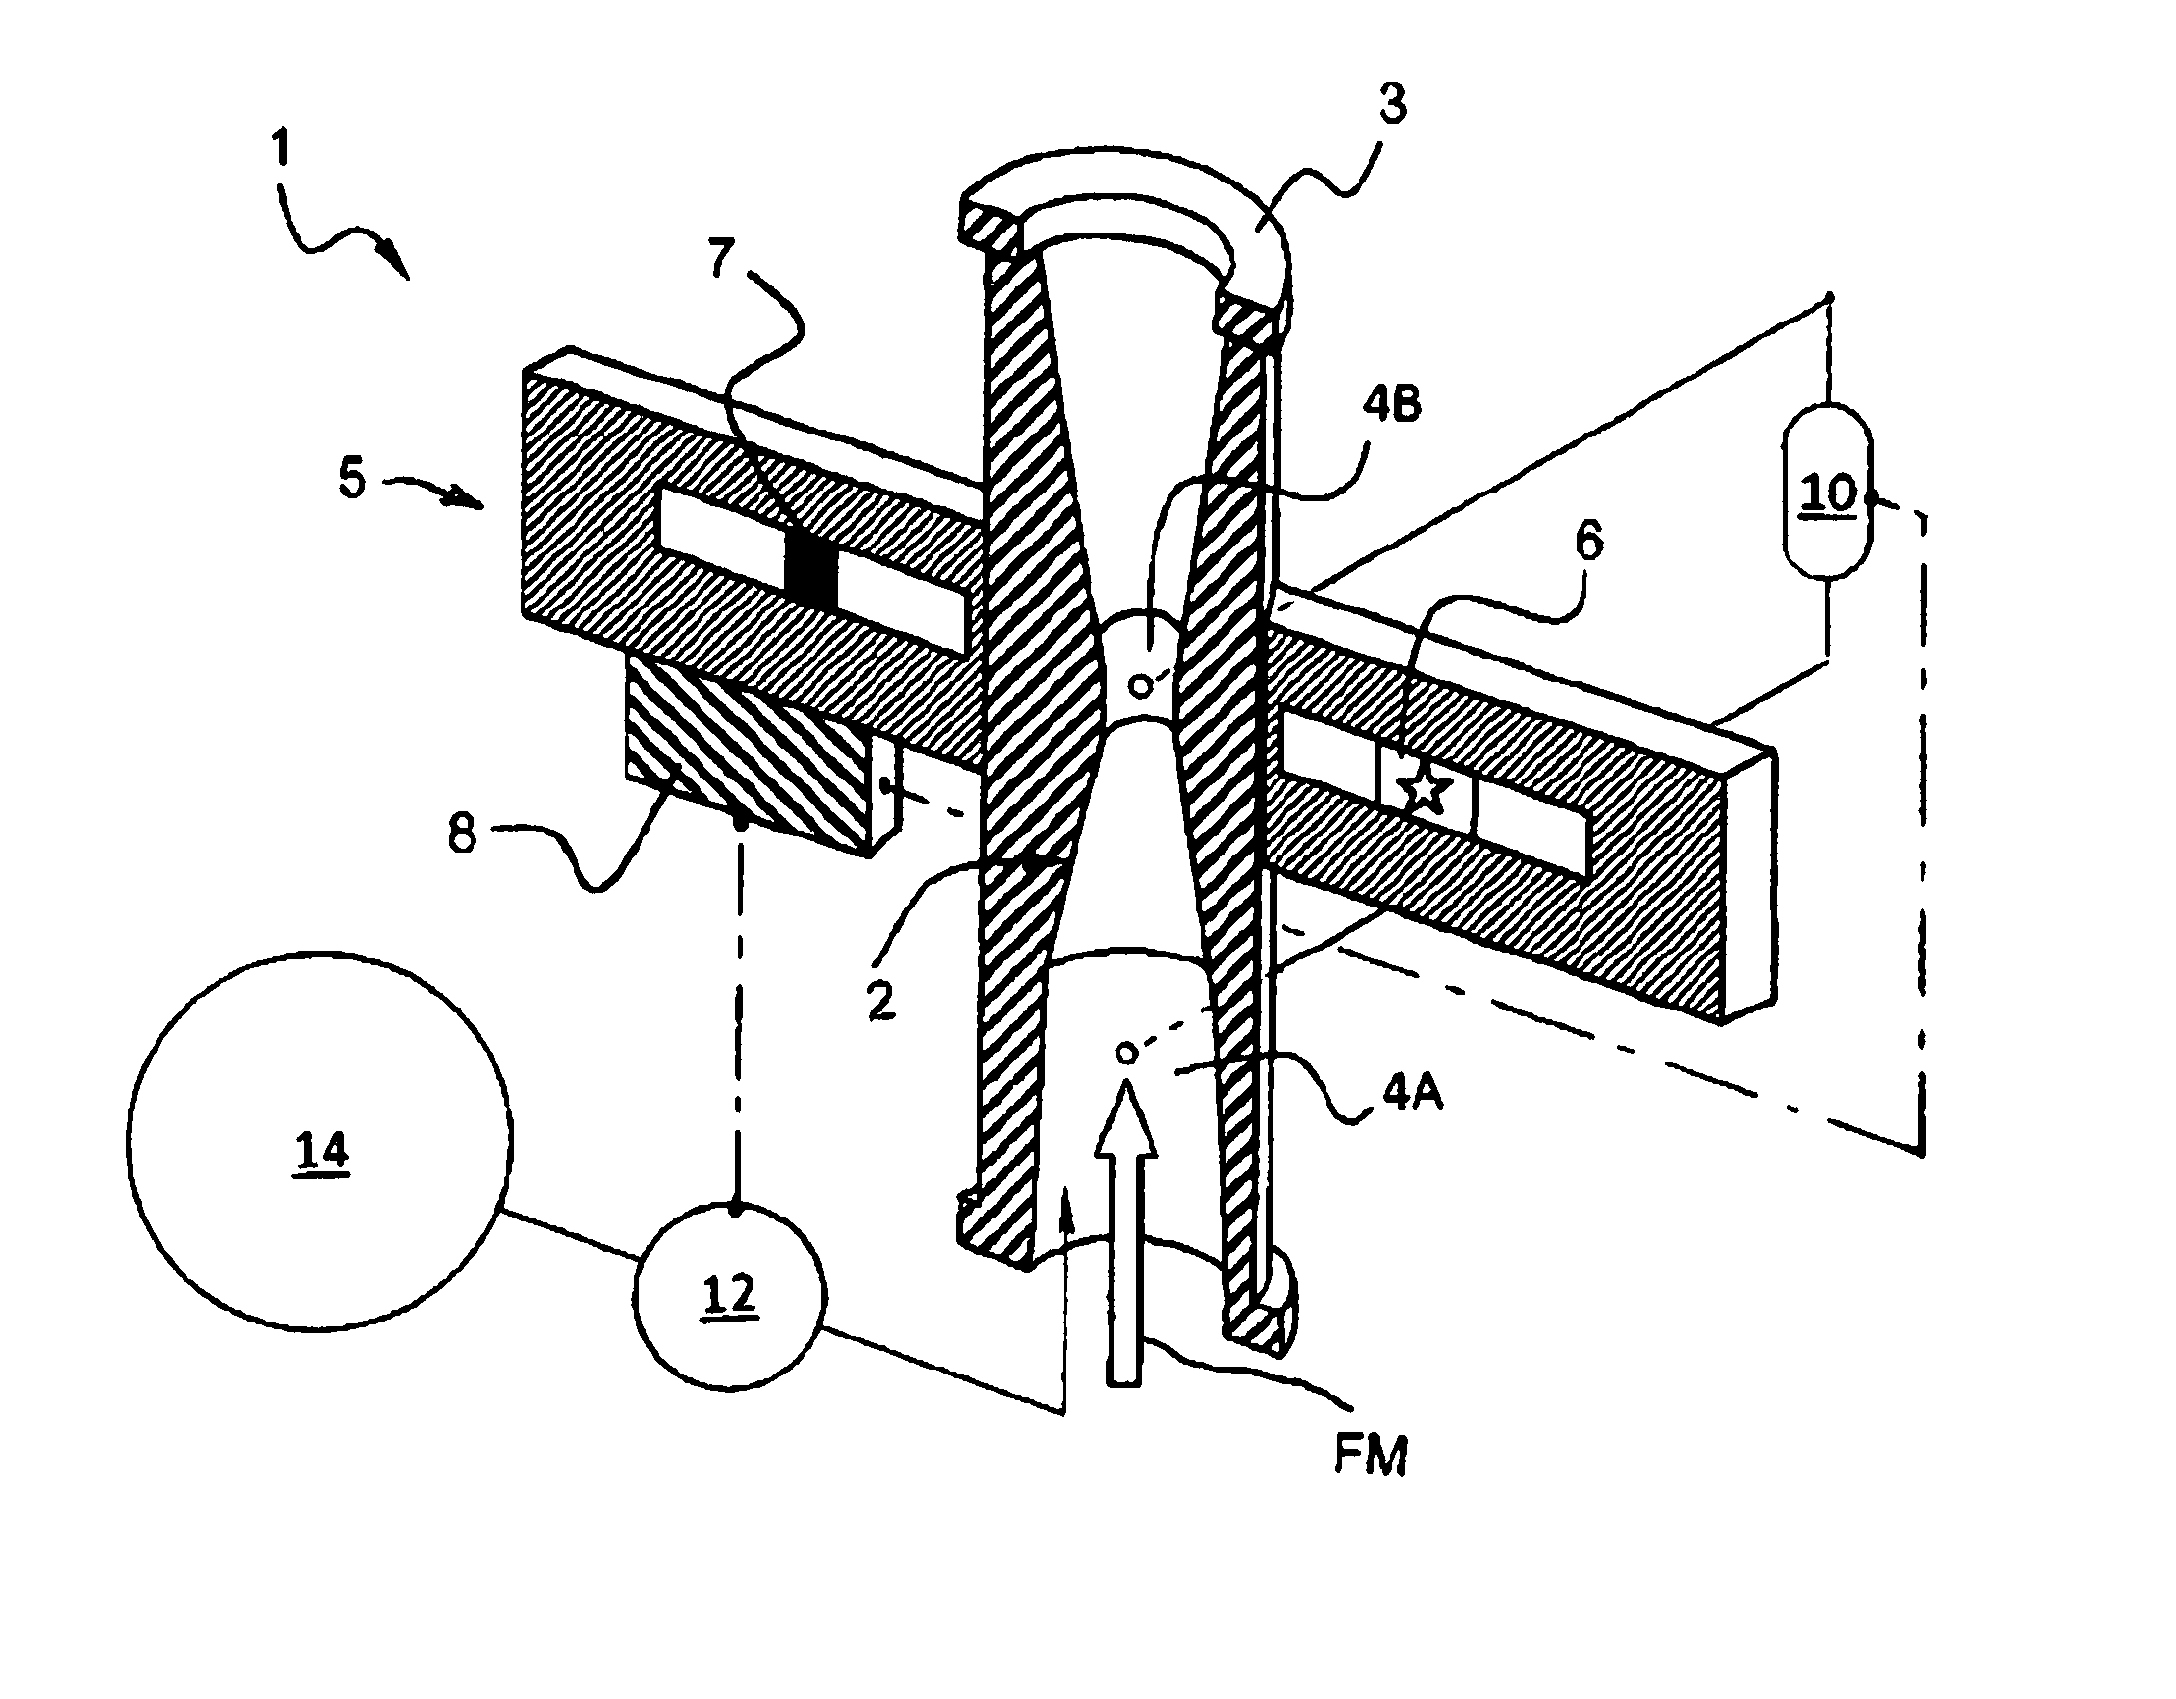 Flow meter system and method for measuring an amount of liquid in a largely gaseous multiphase flow